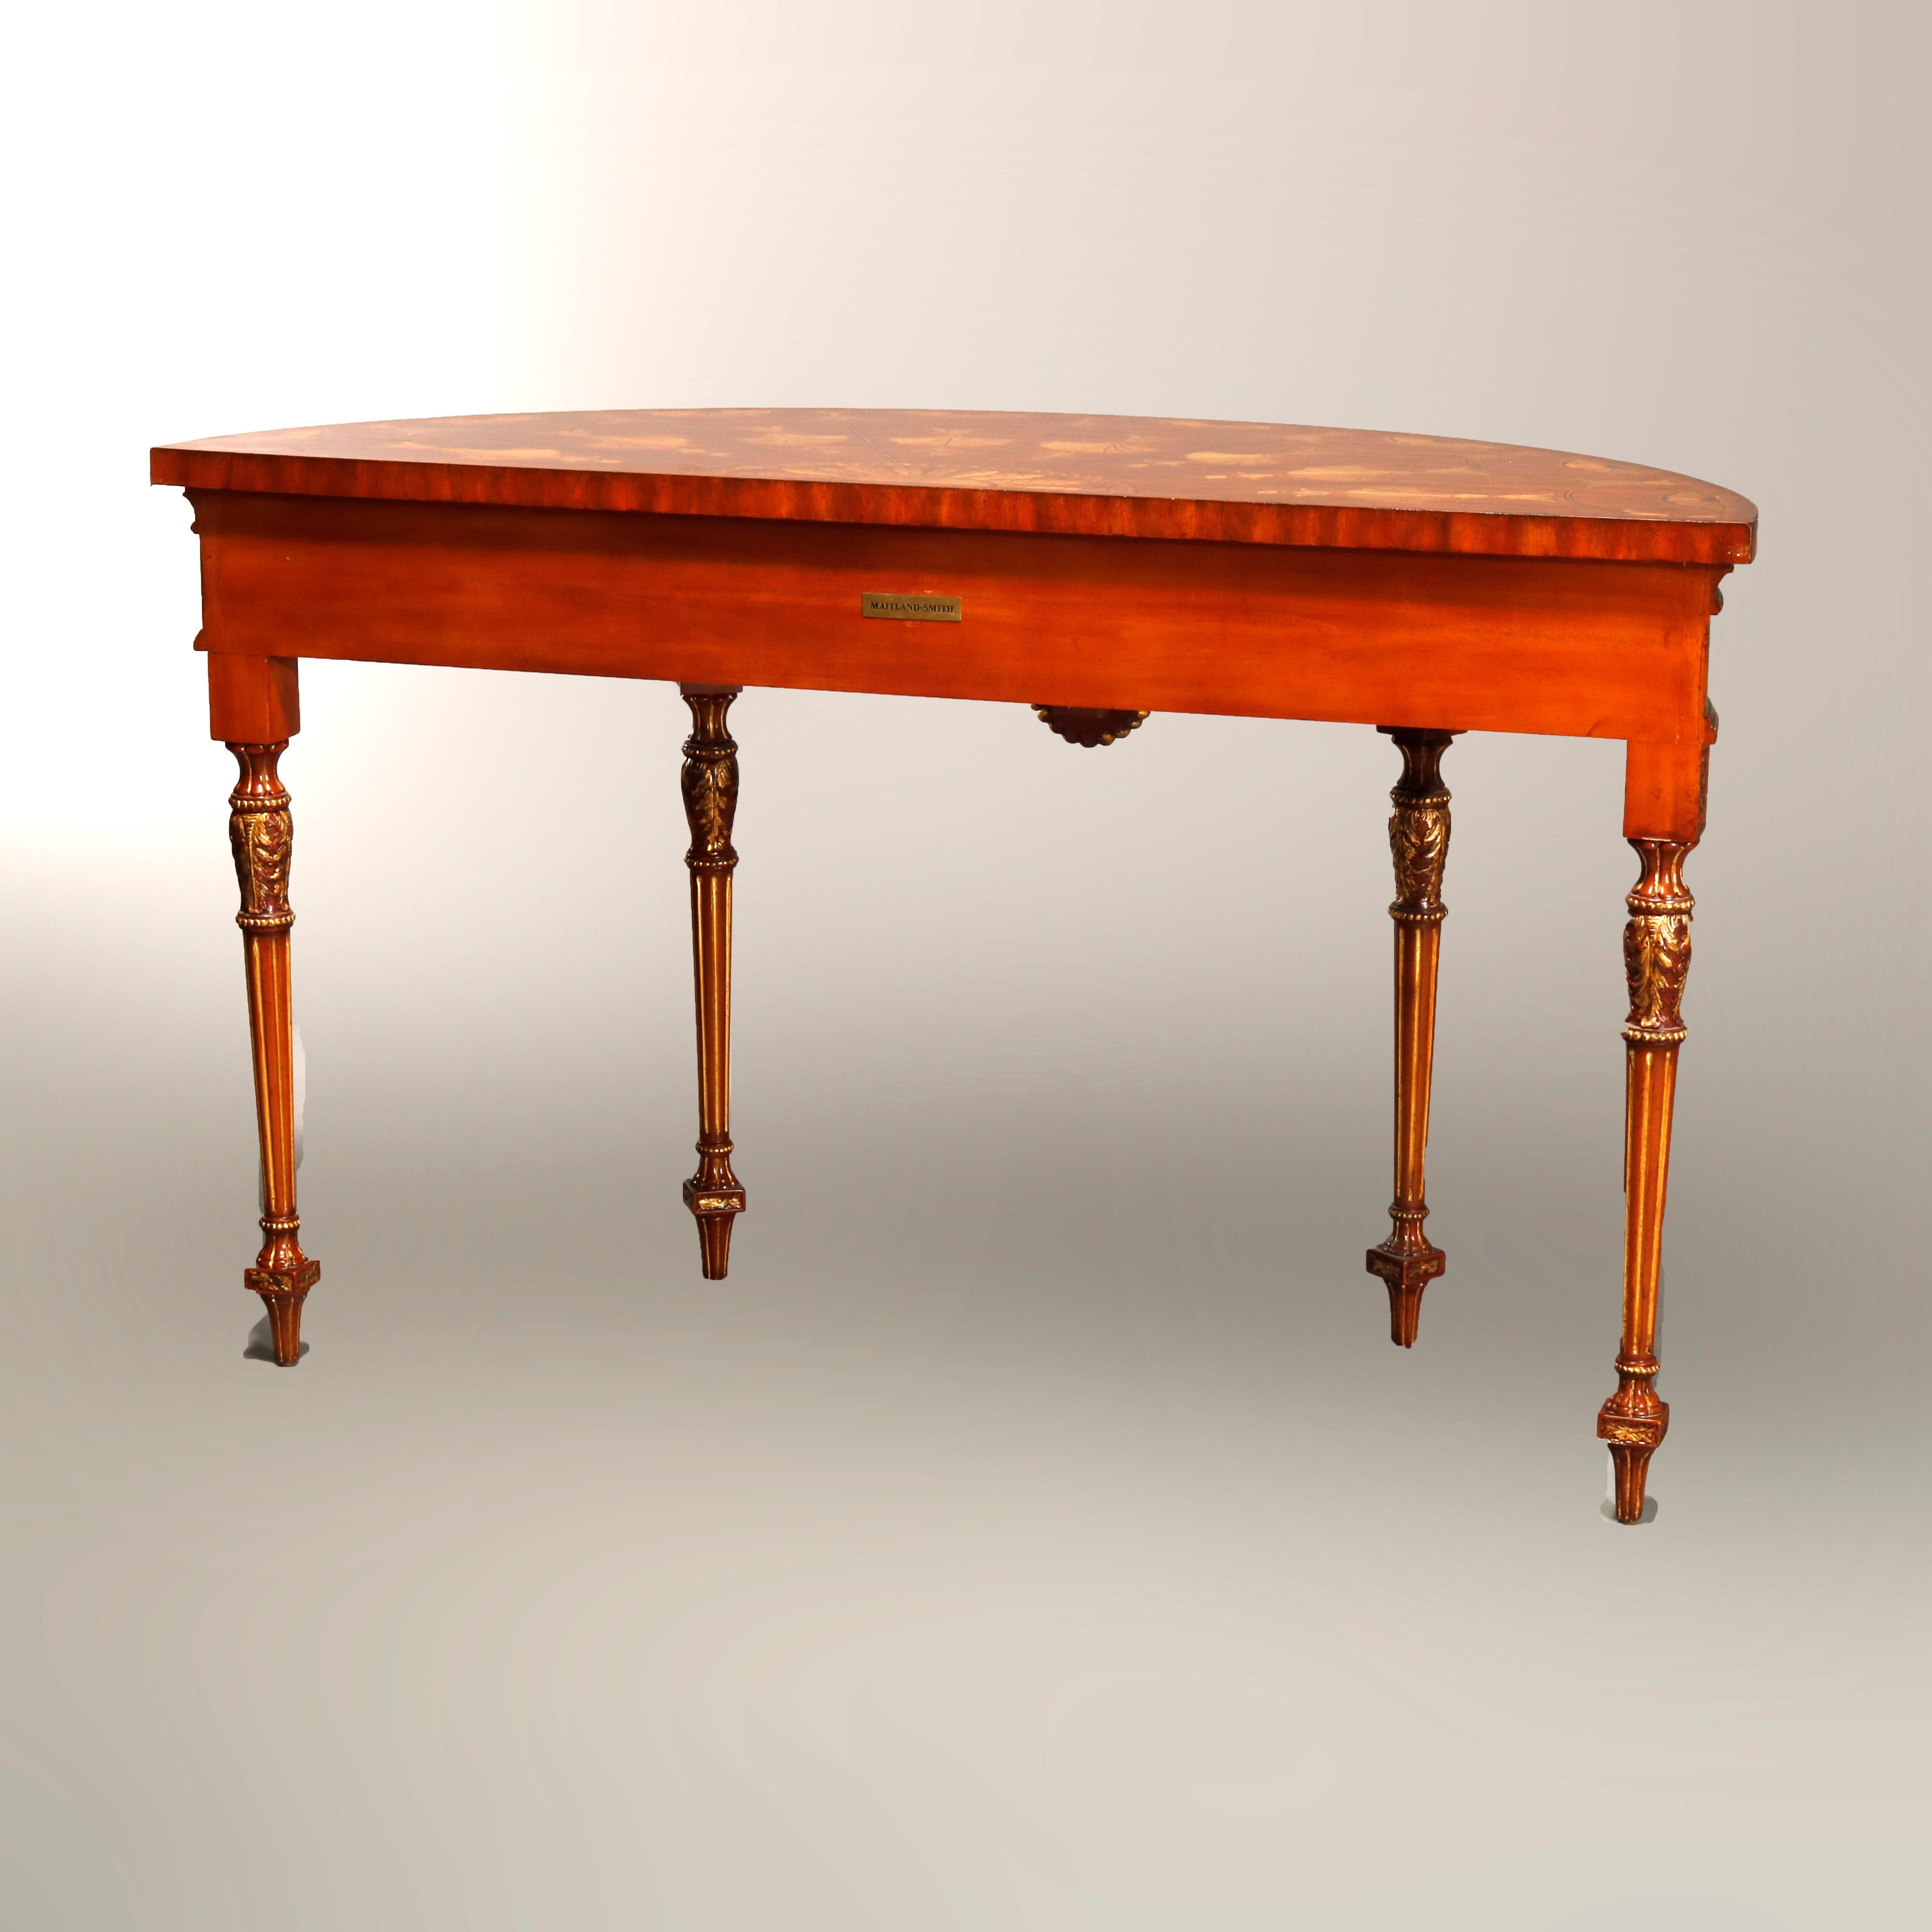 Maitland Smith Parcel Gilt Mahogany & Satinwood Marquetry Demilune Console Table For Sale 9